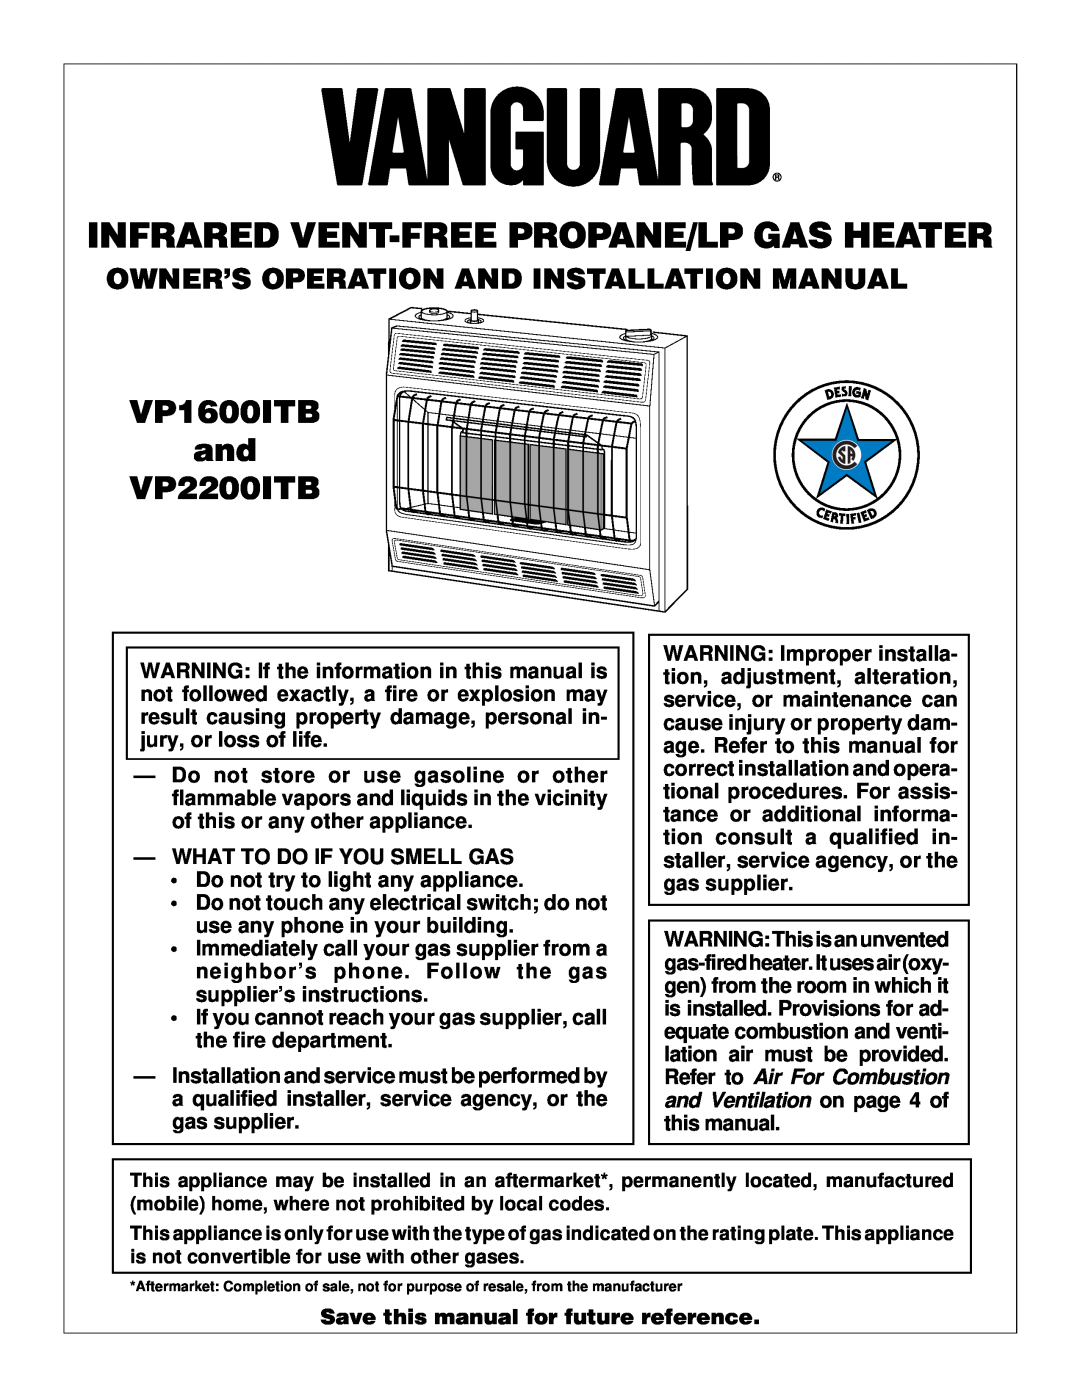 Desa installation manual Infrared Vent-Freepropane/Lp Gas Heater, VP1600ITB and VP2200ITB 